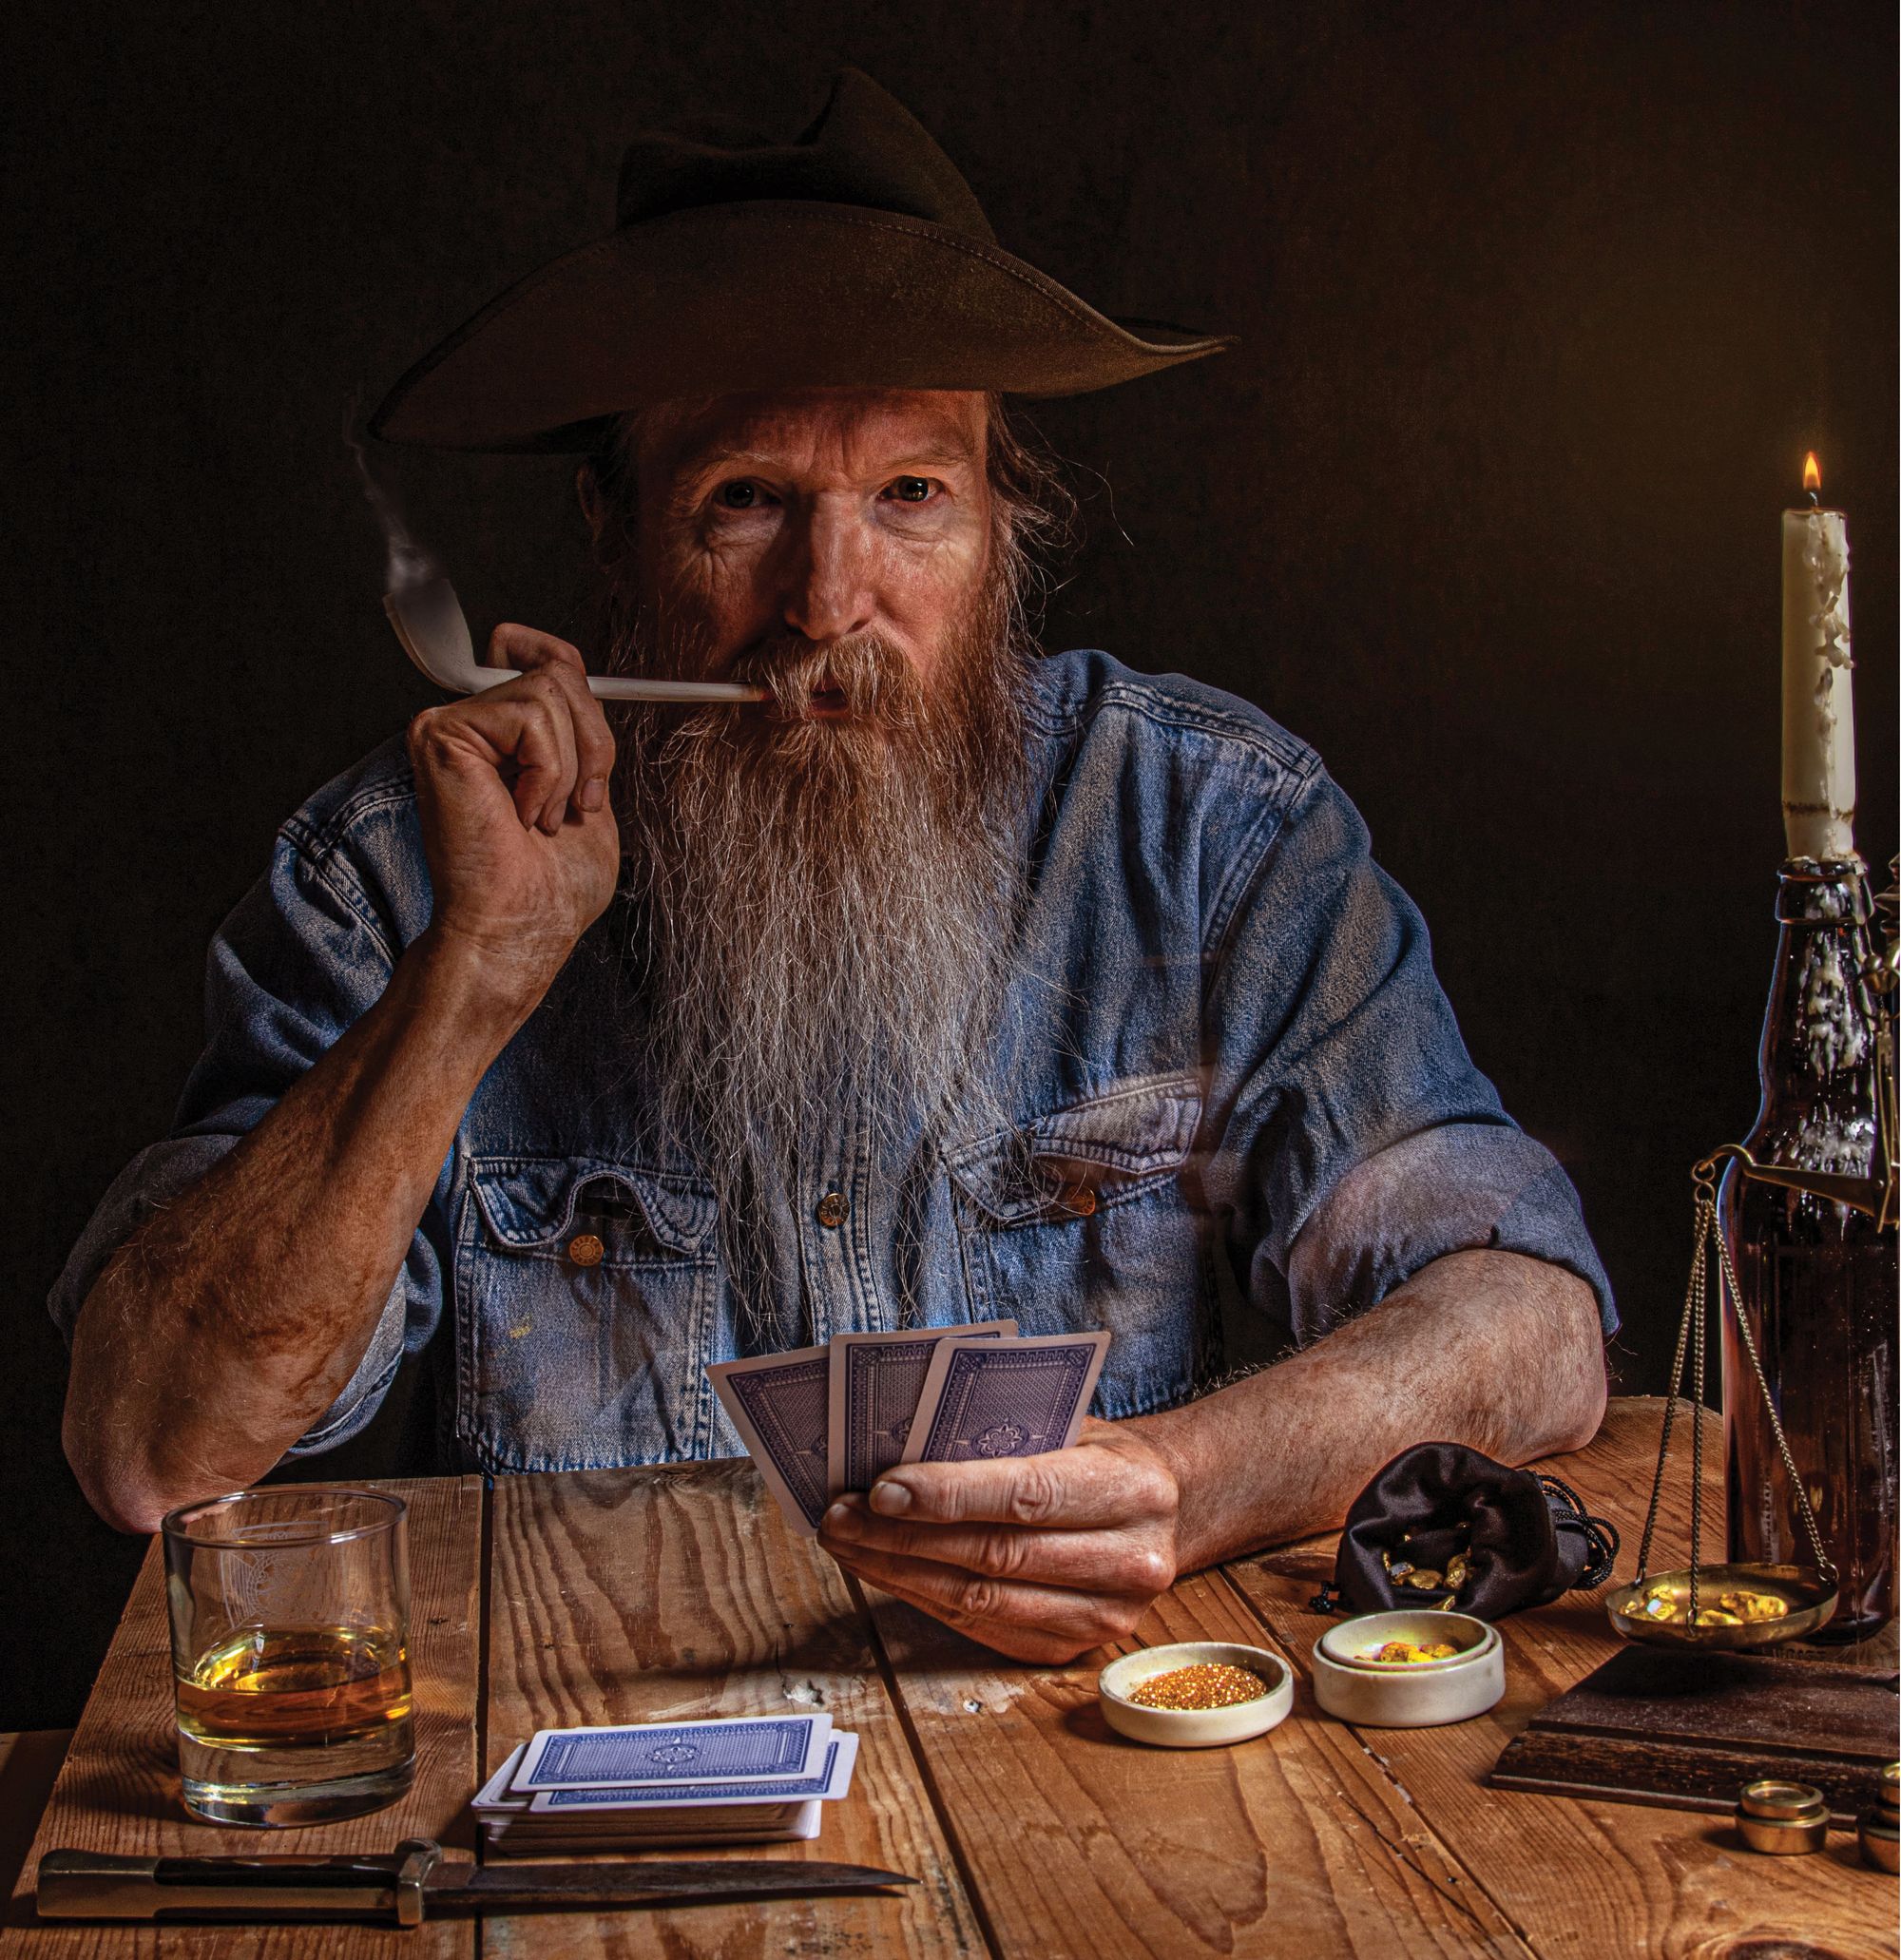 An old, bearded man in a blue denim shirt playing cards at a wooden table